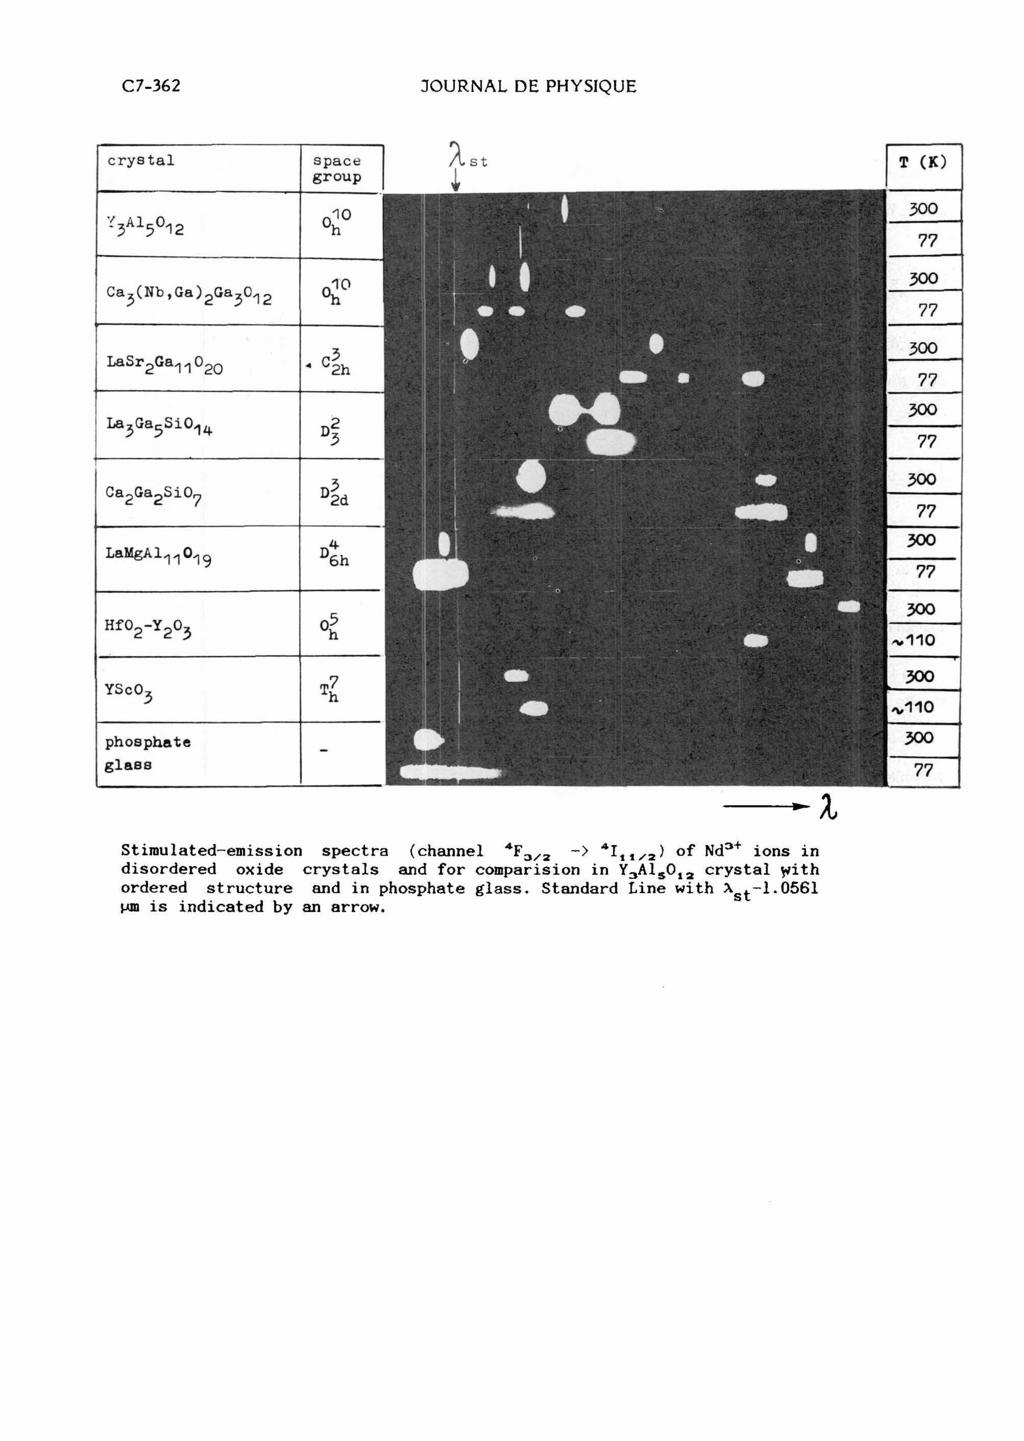 C7-362 JOURNAL DE PHYSIQUE Stimulated-emission spectra (channel 4F, -> 411,,2) of ~ d=+ ions in disordered oxide crystals and for